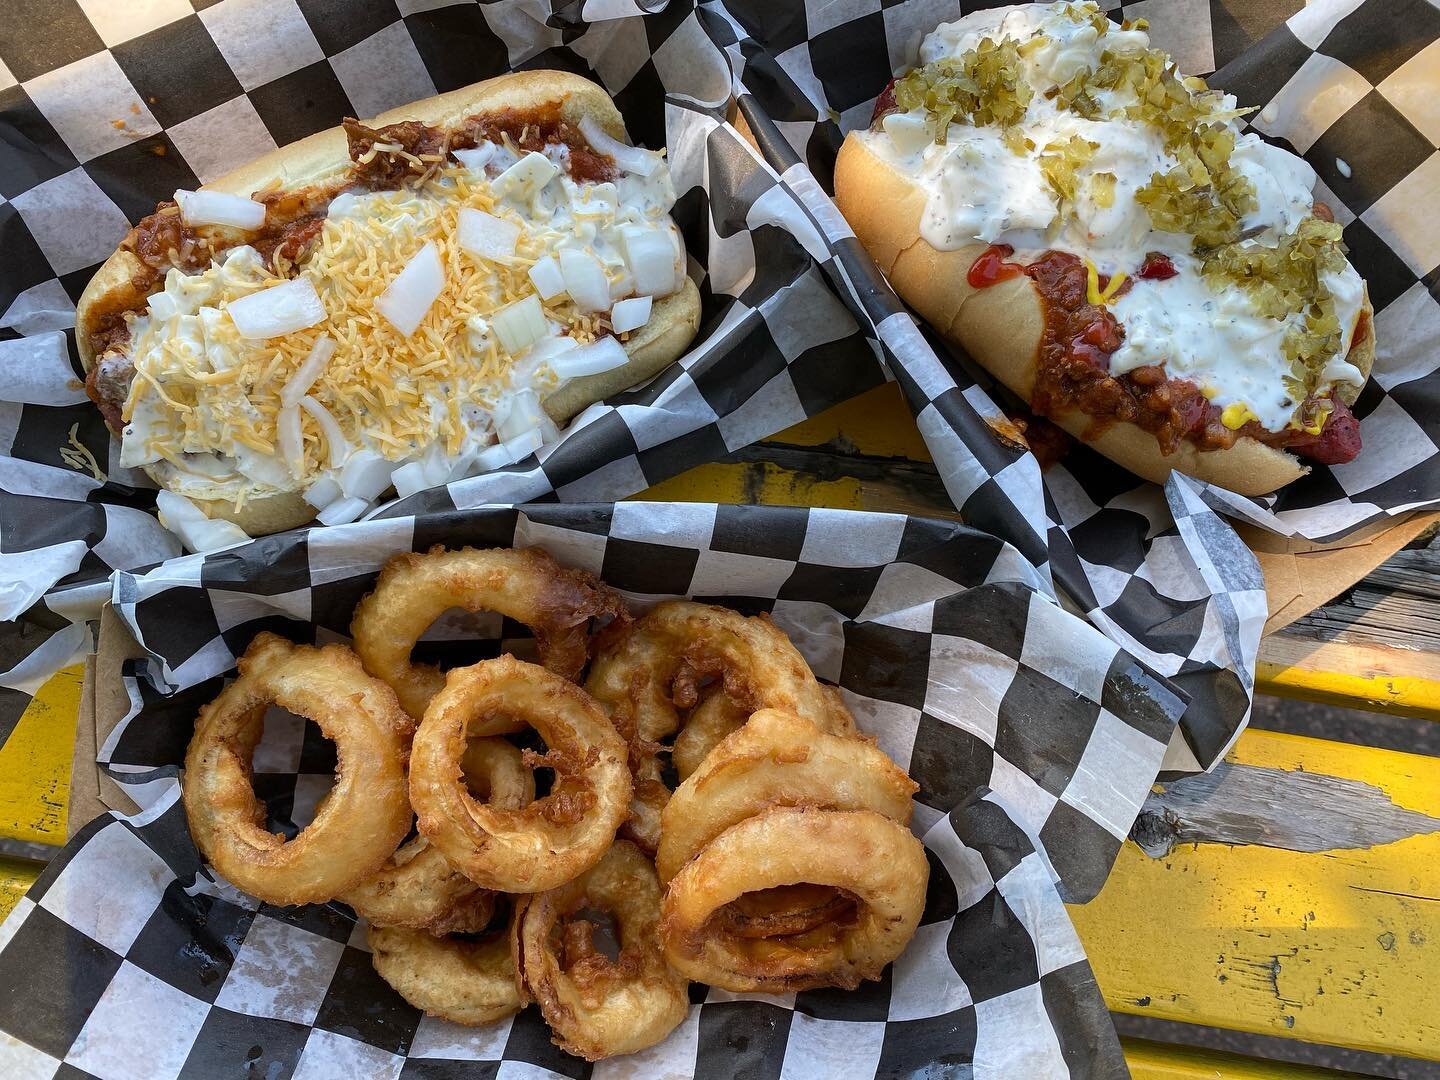 So many choices at #hungrydog #onionrings amaze as was slaw these dogs are huge #mitchellsd #lunch #hotdogs #food #placesiveeaten